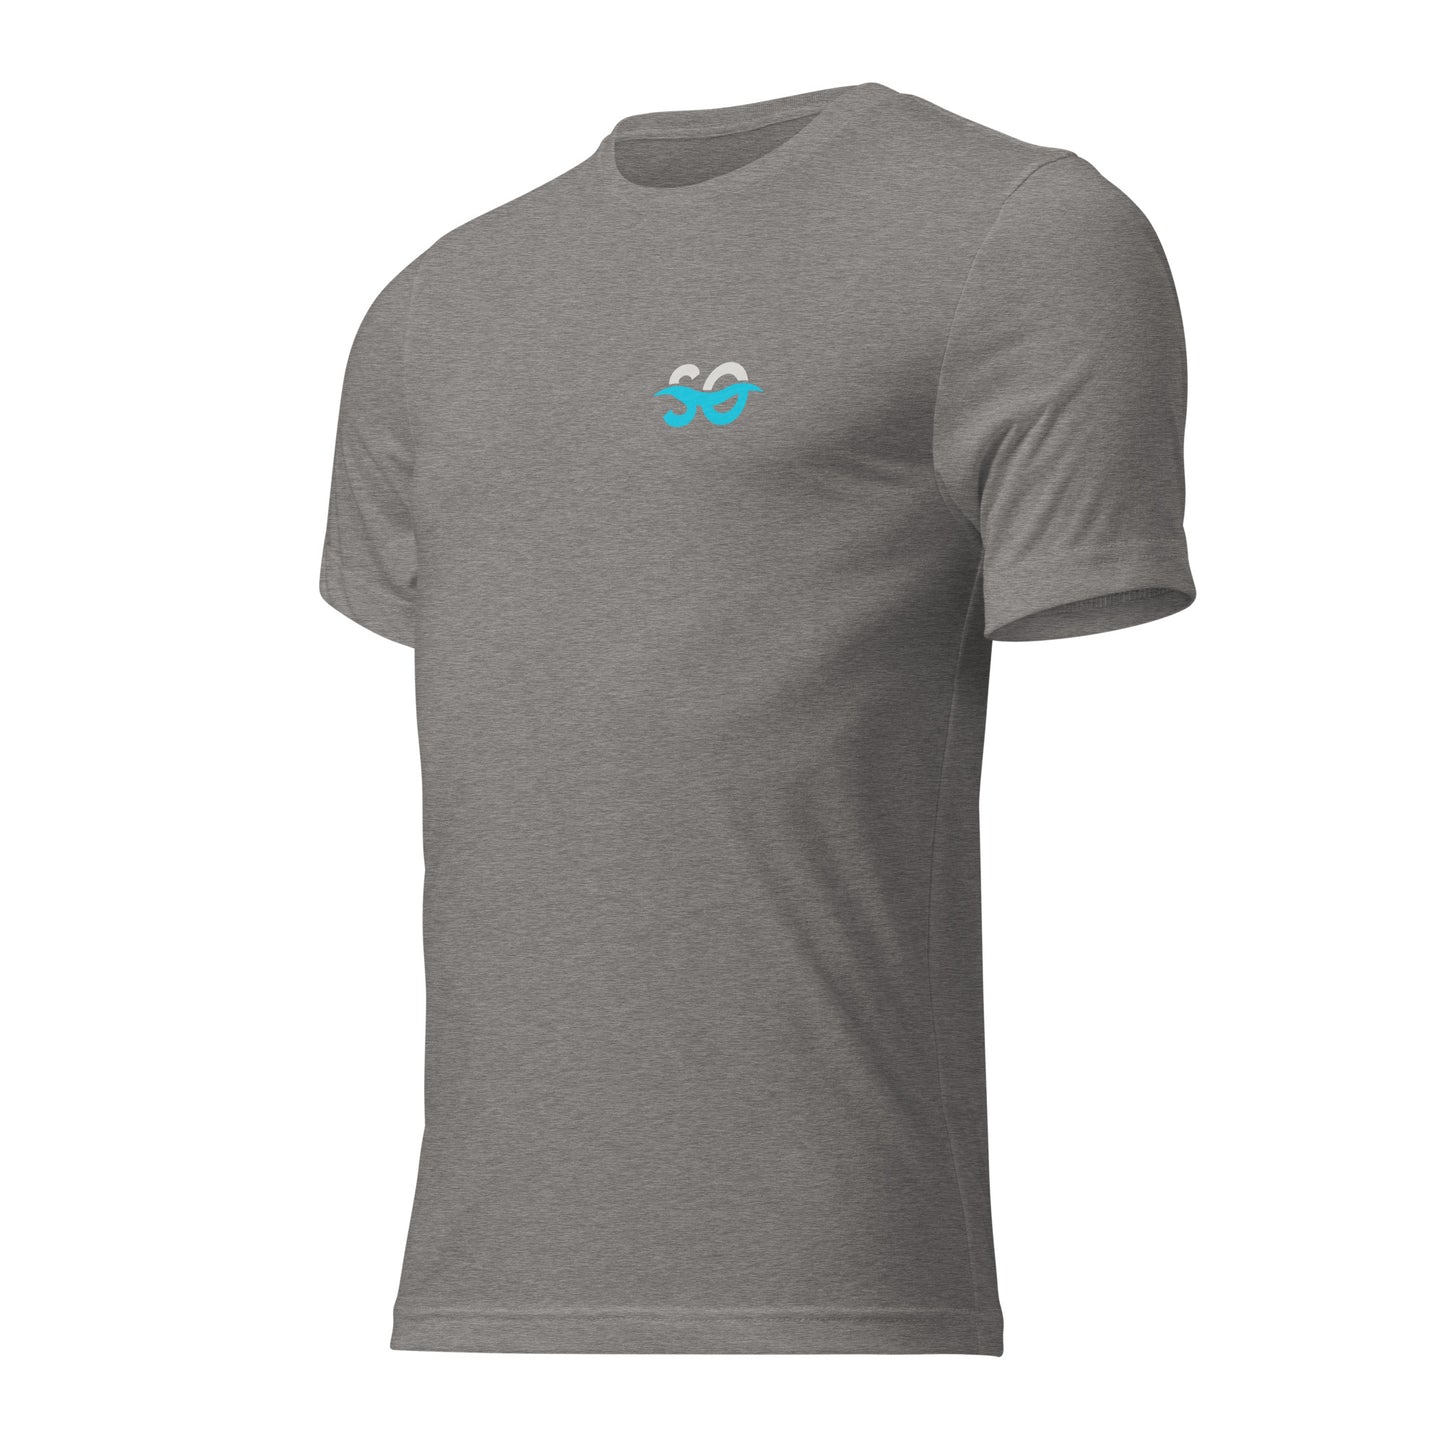 a grey t - shirt with a blue logo on the chest